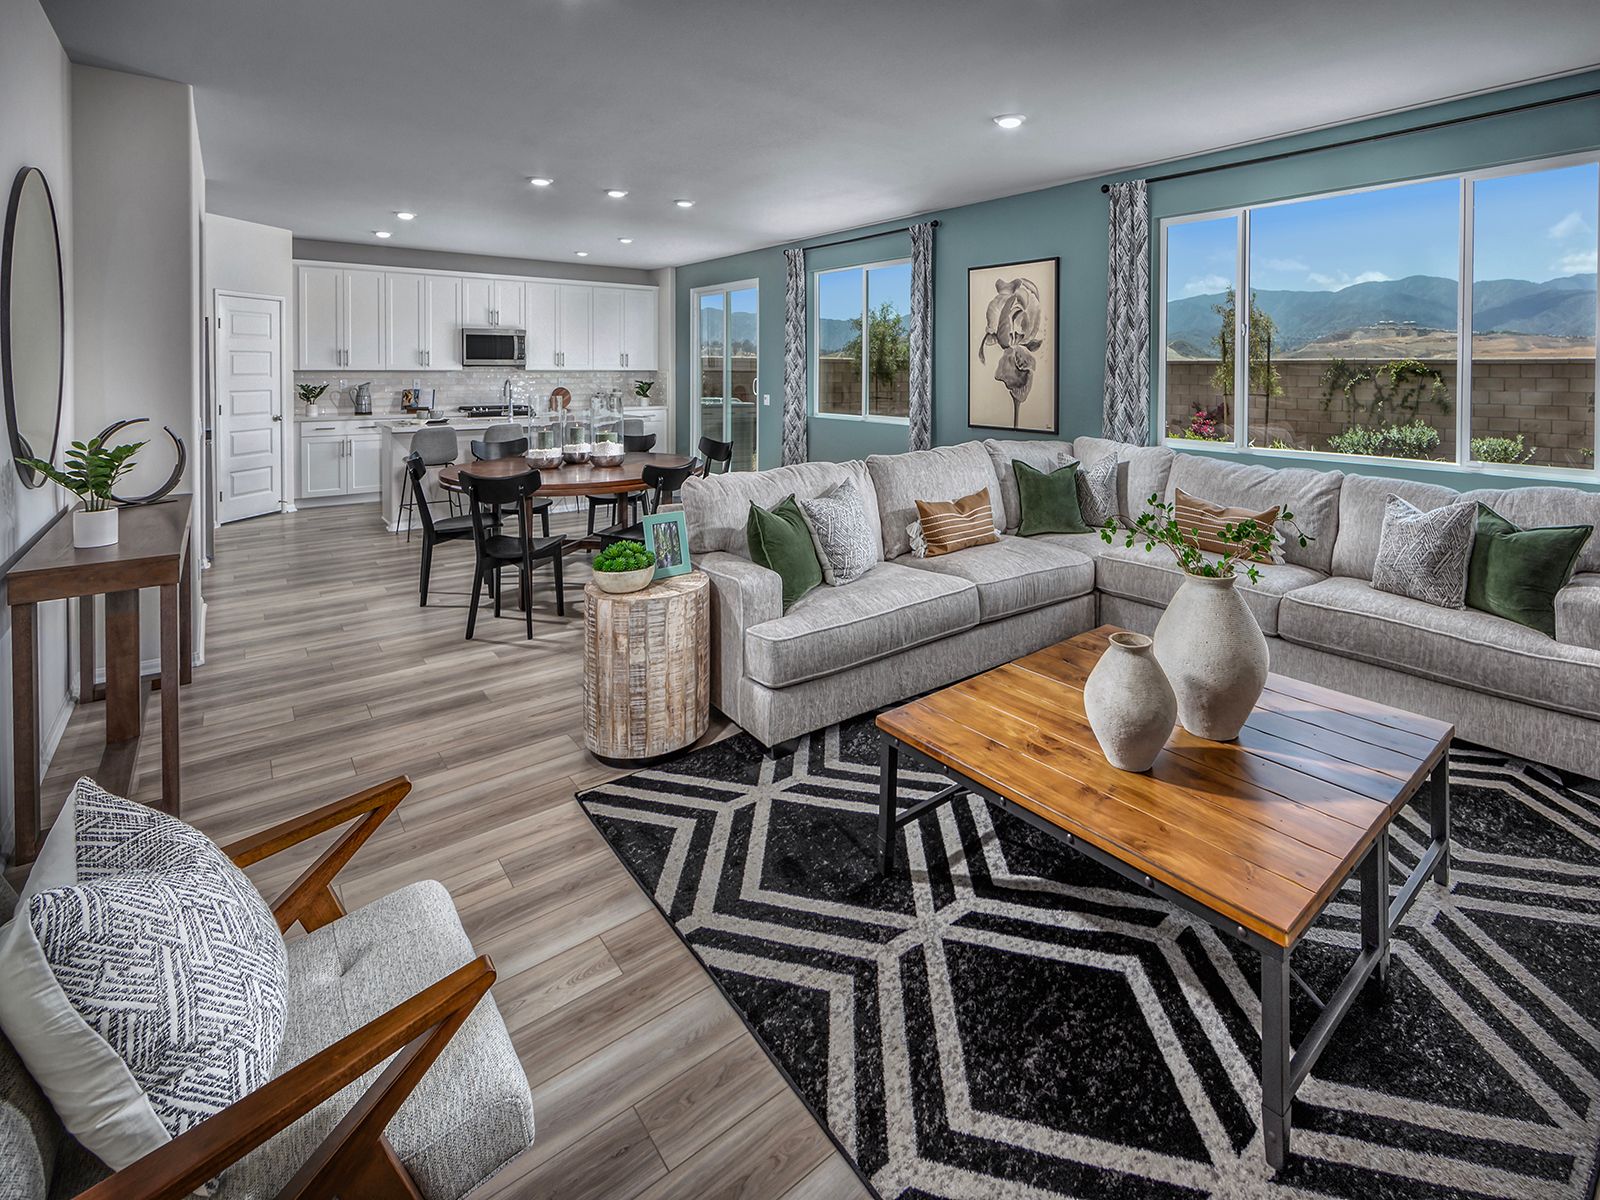 Stay connected with the whole family in the open-concept living space.